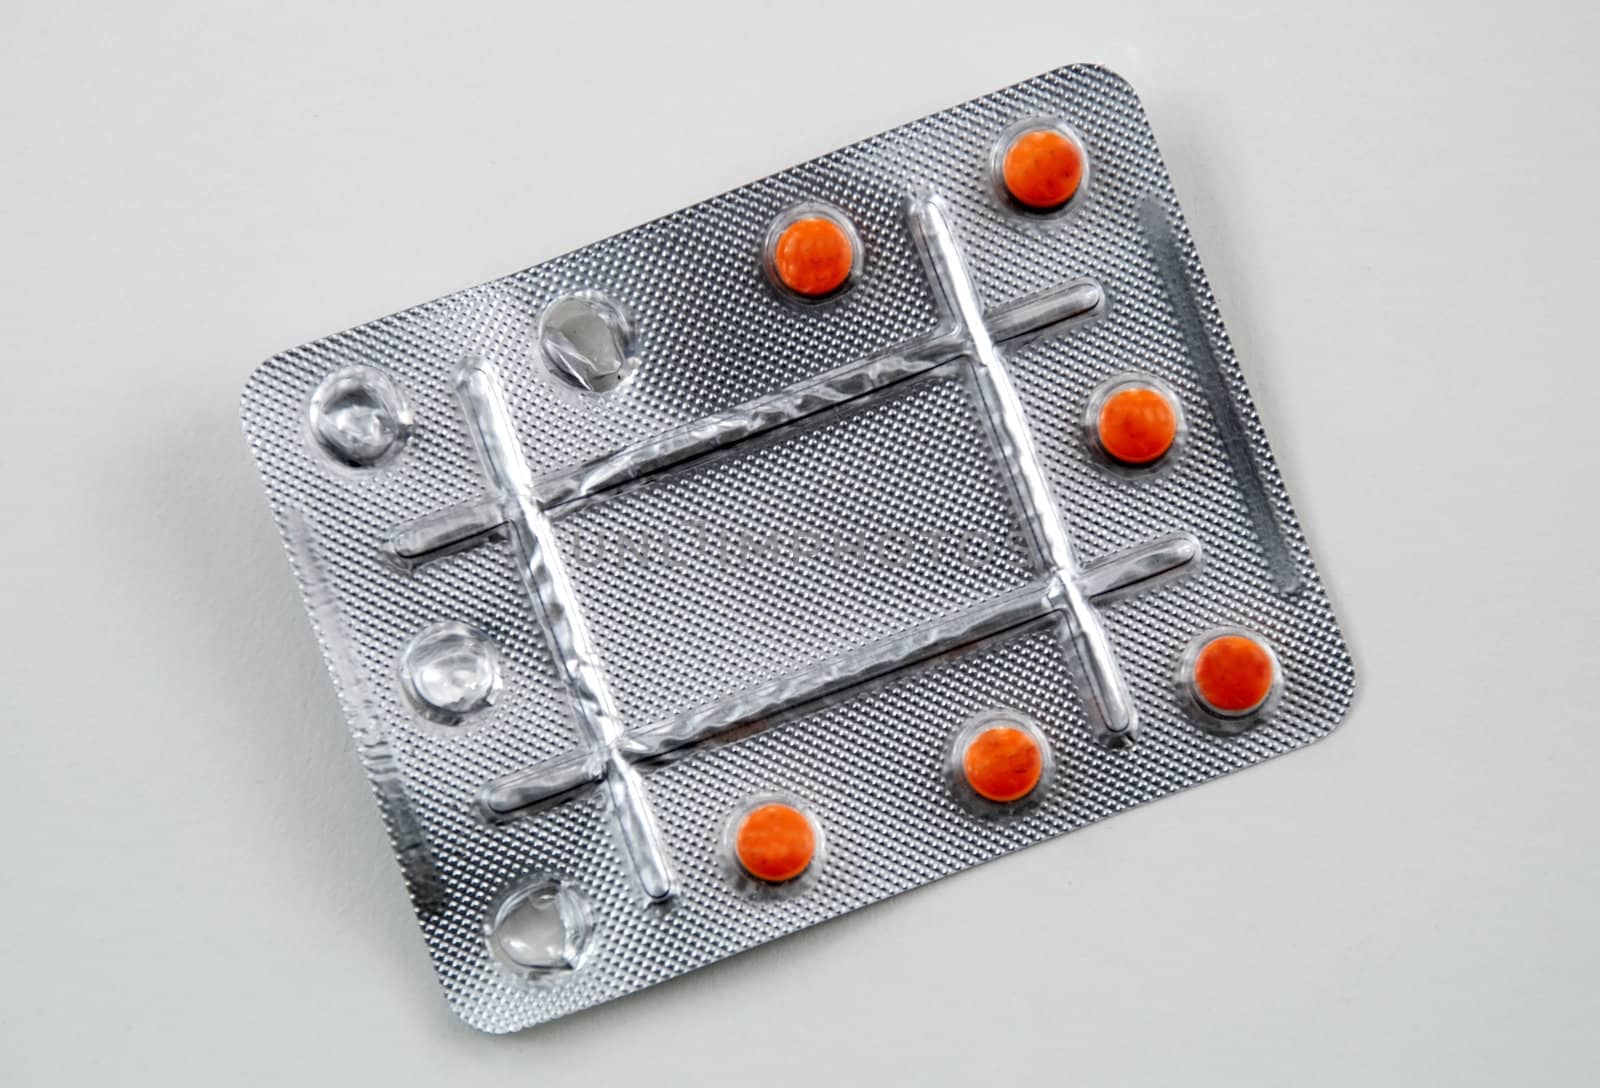 stock pictures of medicines, pills and other pharmaceuticals